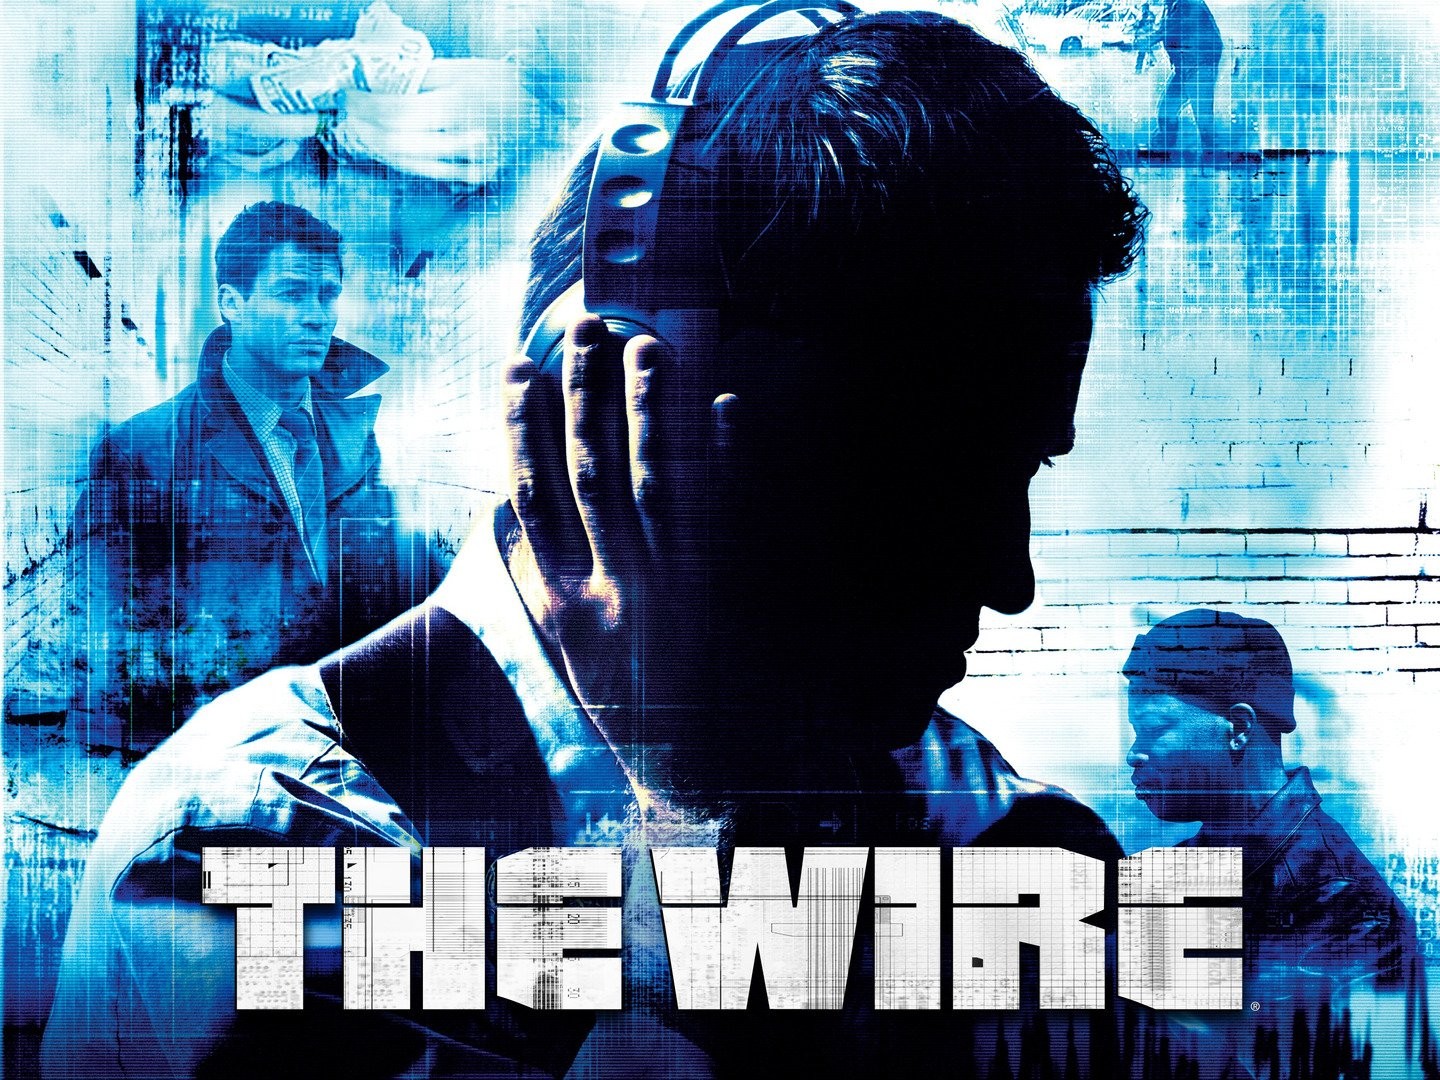 The Wire Season 1 DVD Very Good, the Wire Listen Carefully 26359887321